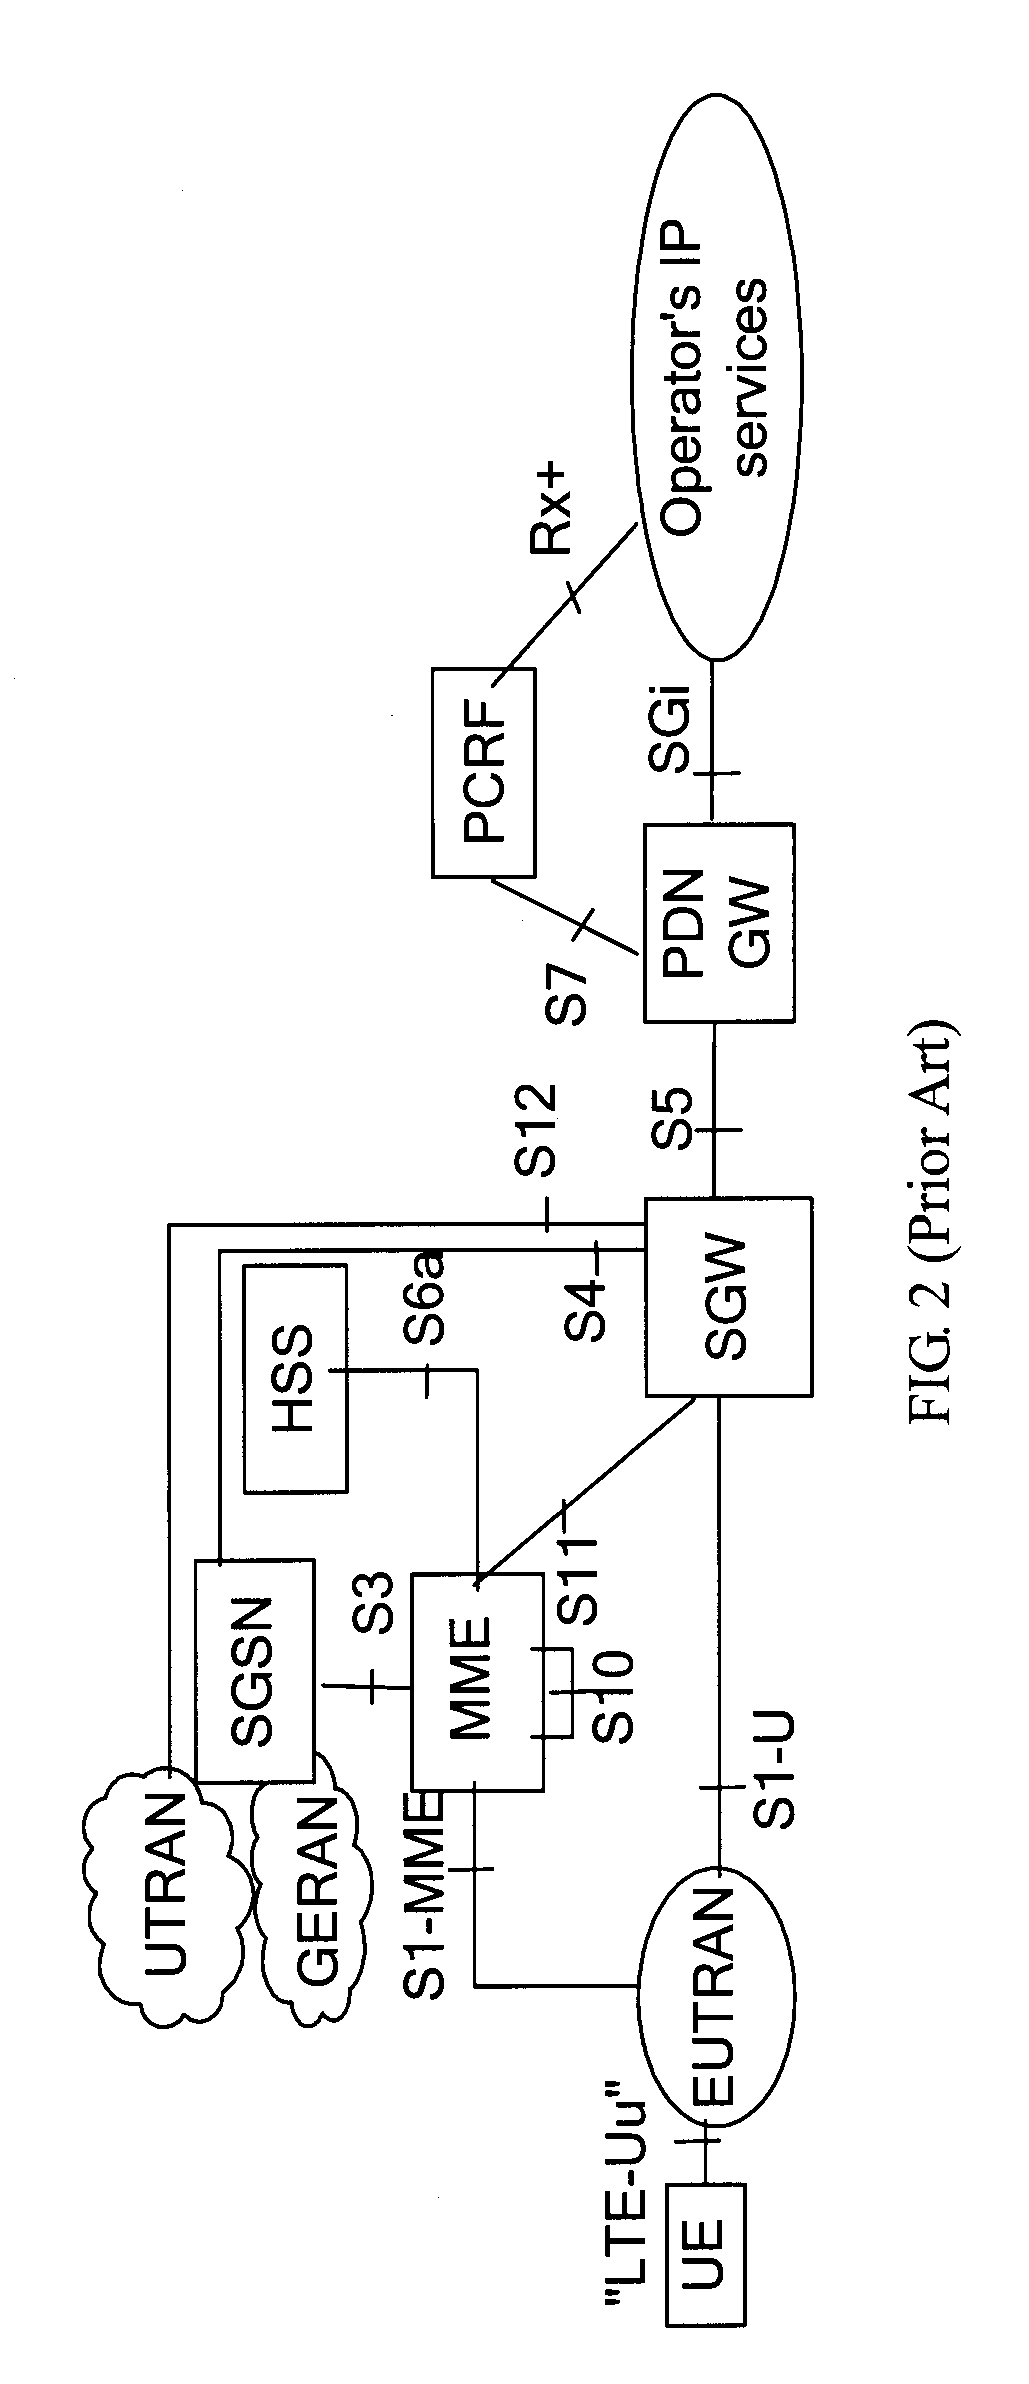 Method and apparatus for implementing emergency calls